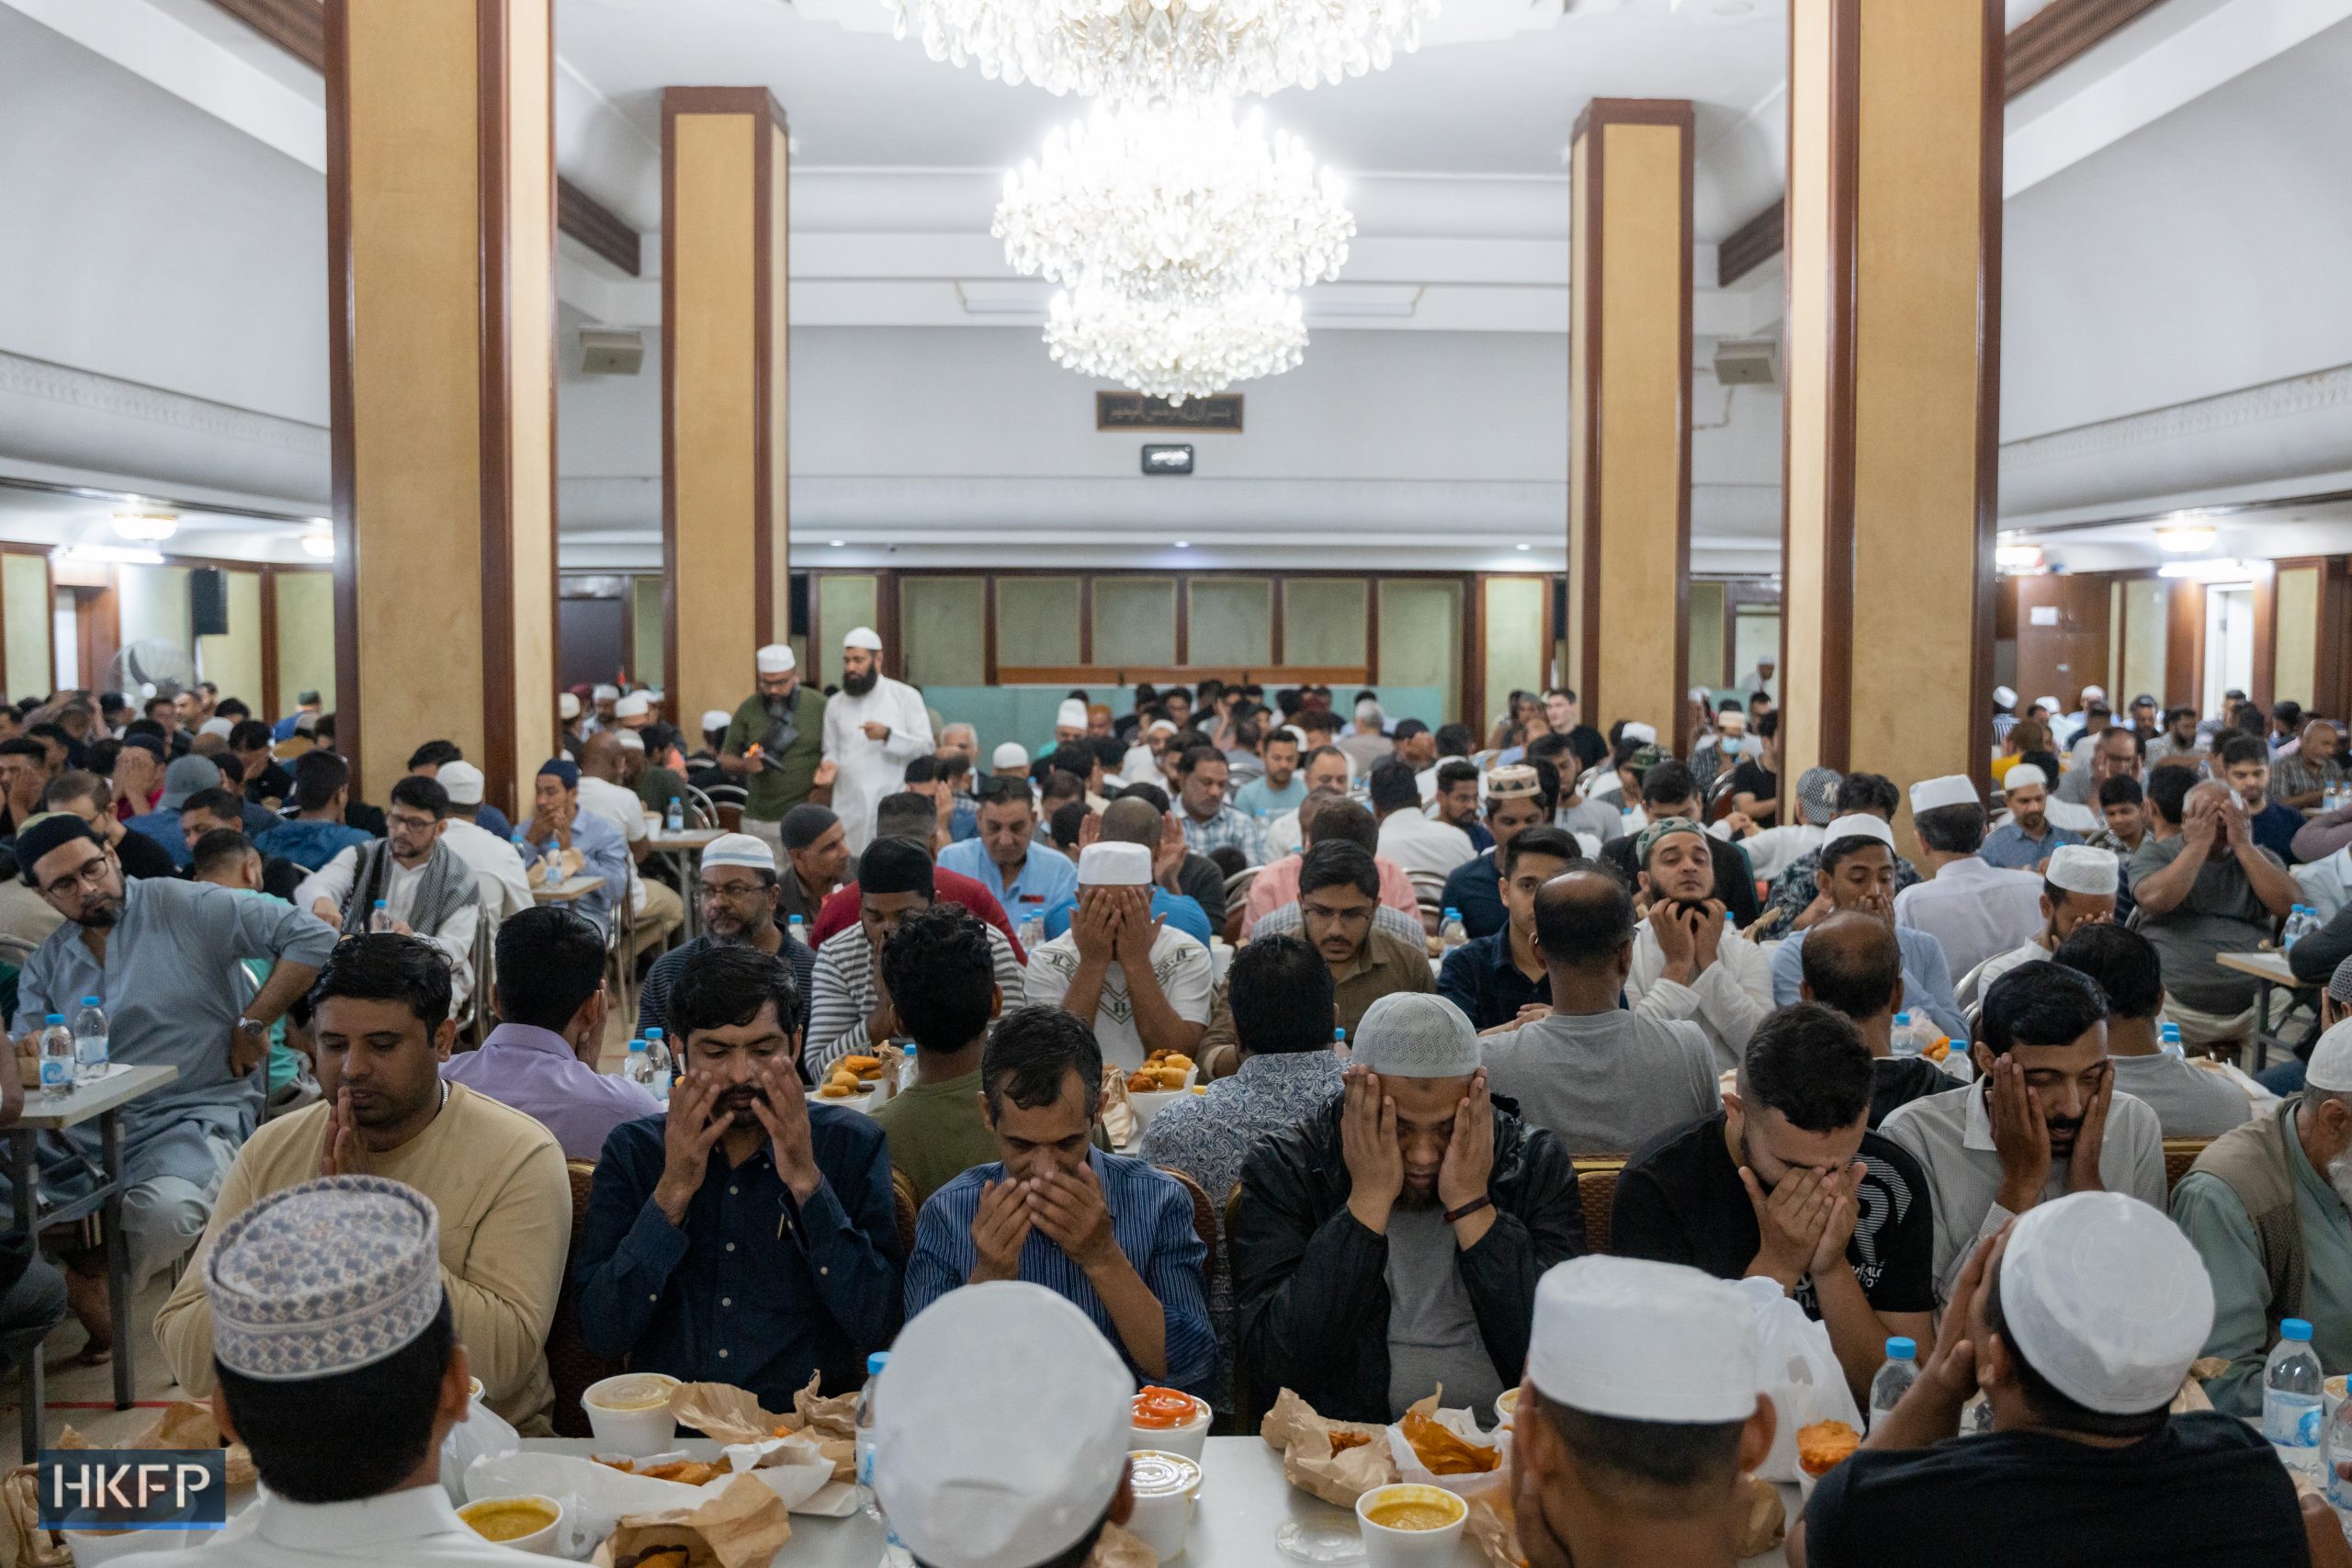 The first evening of Ramadan at Kowloon Mosque on March 23, 2023. It marked the first time since 2019 that they could gather and break their fast in public due to Covid-19 restrictions over the past three years. Photo: Kyle Lam/HKFP.